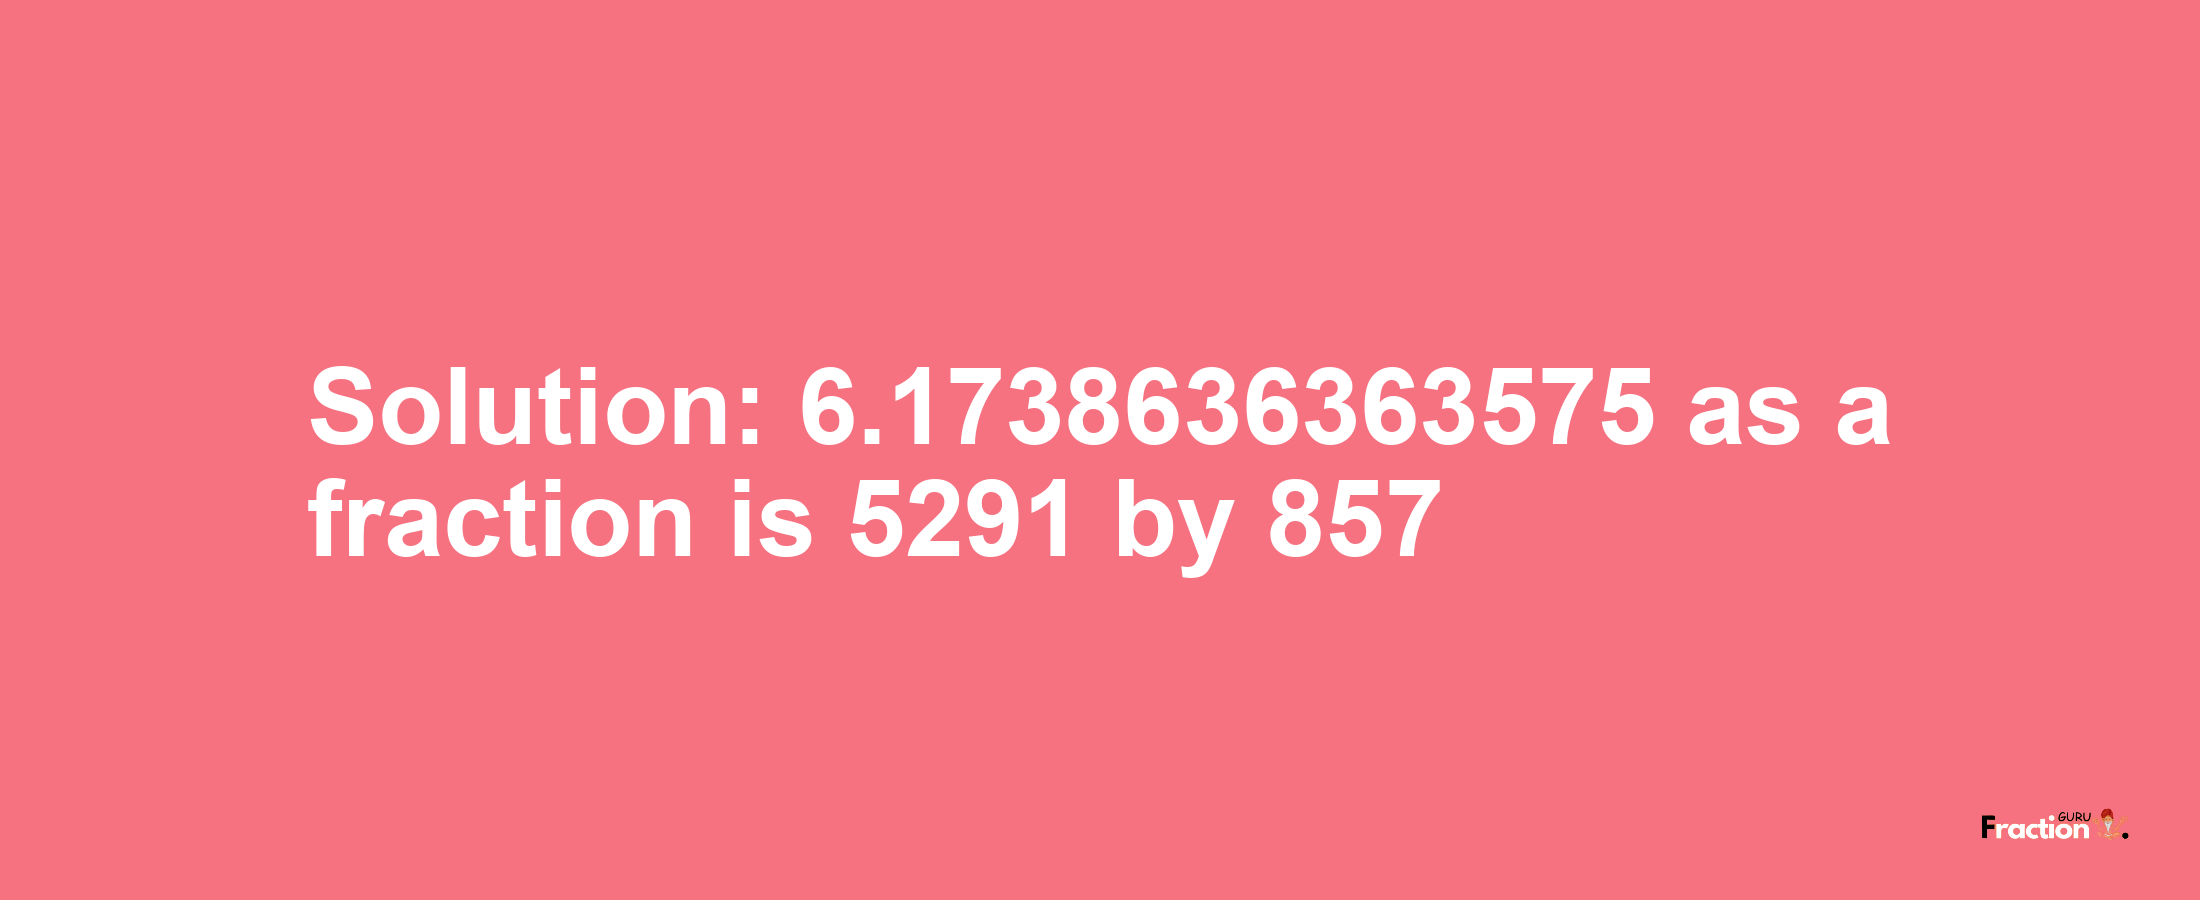 Solution:6.1738636363575 as a fraction is 5291/857